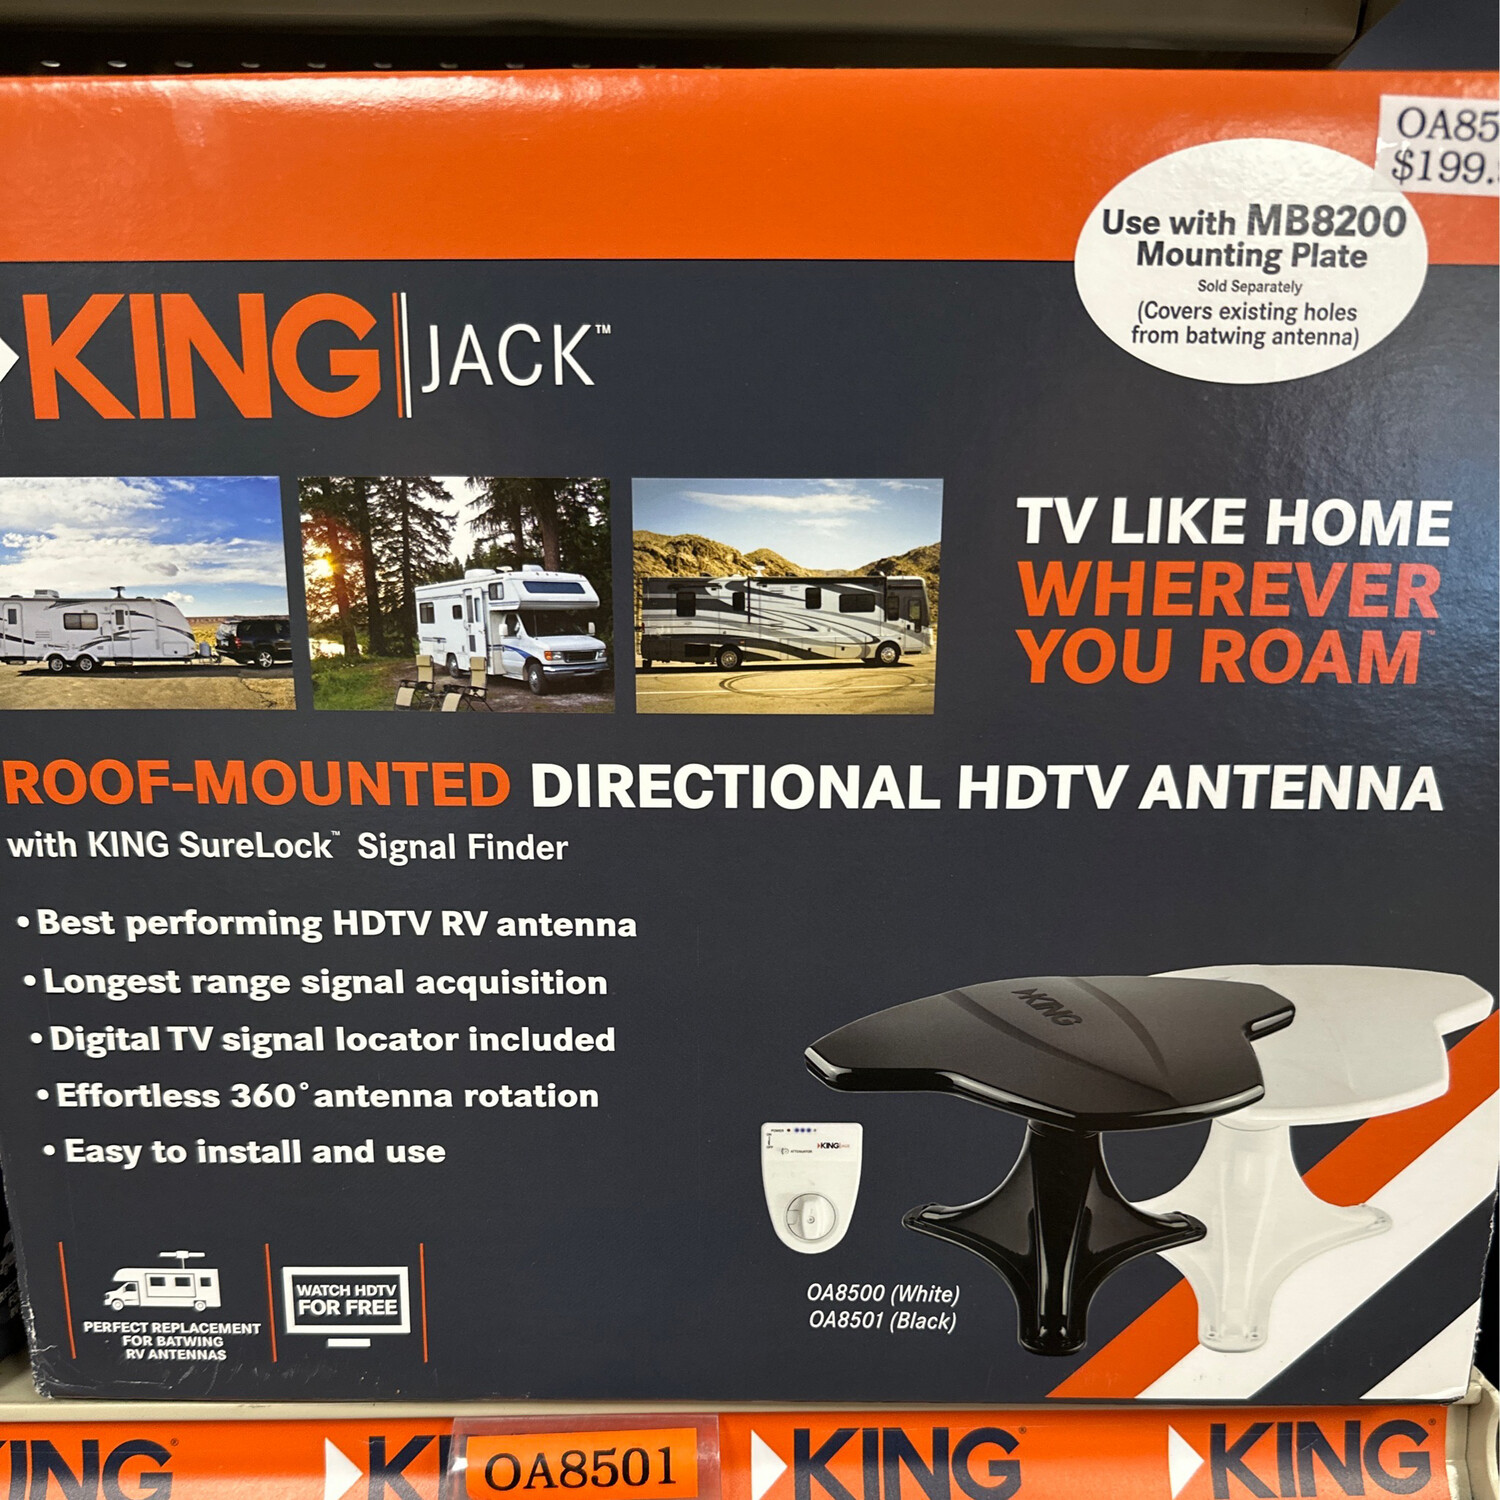 Roof Mounted Directional HDTV Antenna